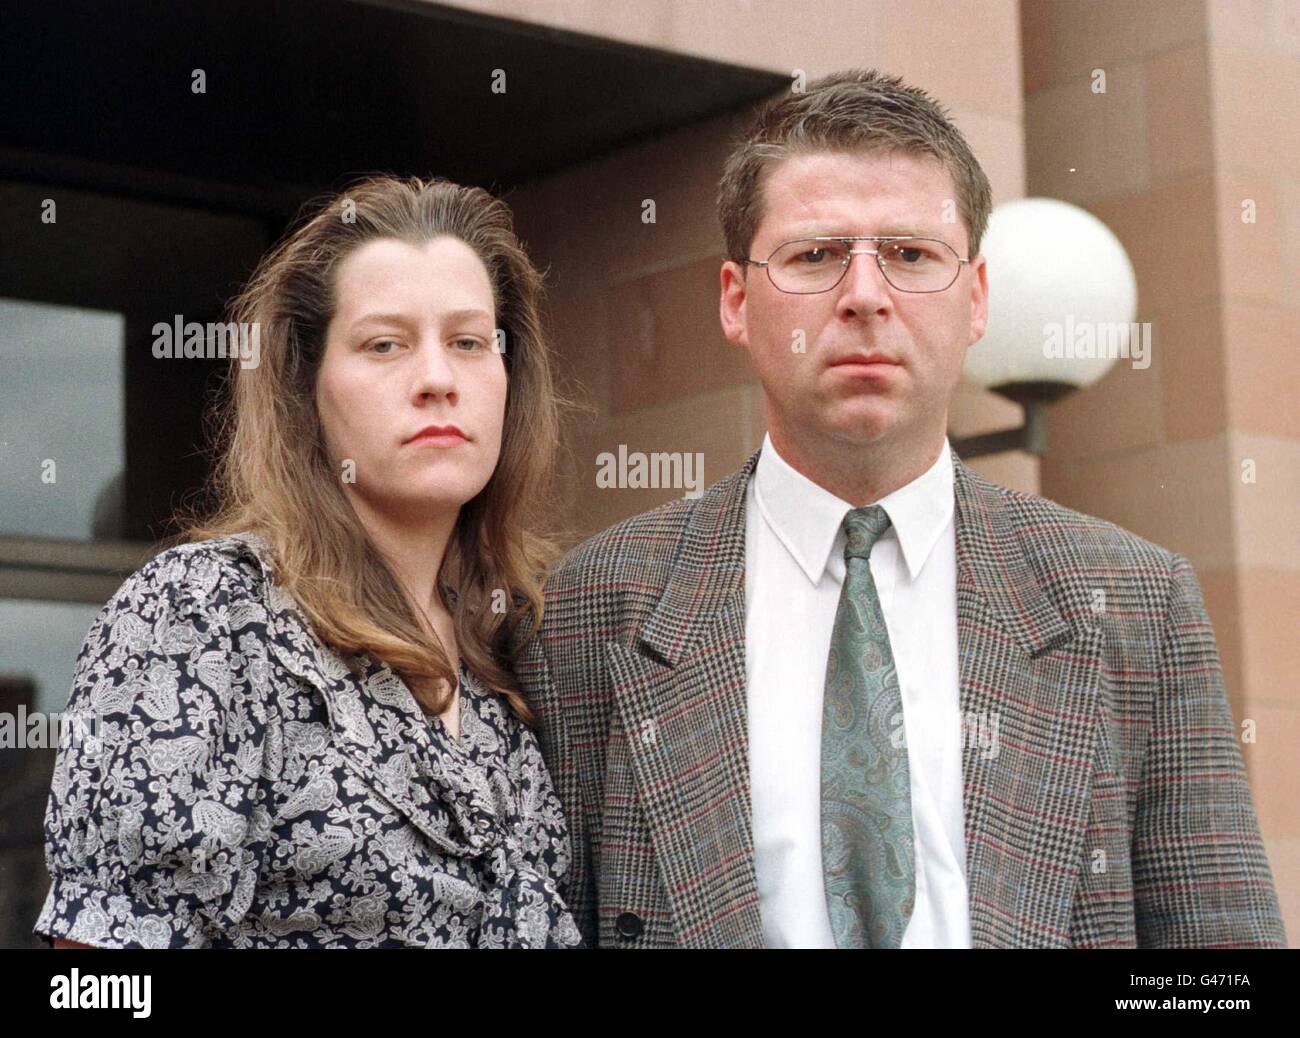 Kirsty Cassidy and her husband John at the start of the Fatal Accident Inquiry into the death of their premature baby, Rebecca, whom they claim doctors could have saved. The inquiry took place at Kilmarnock Sheriff Court. 26/06/1997 A sheriff backed paediatrician Dr Faisal al-Zidgali in his decision not to resuscitate the baby. Stock Photo